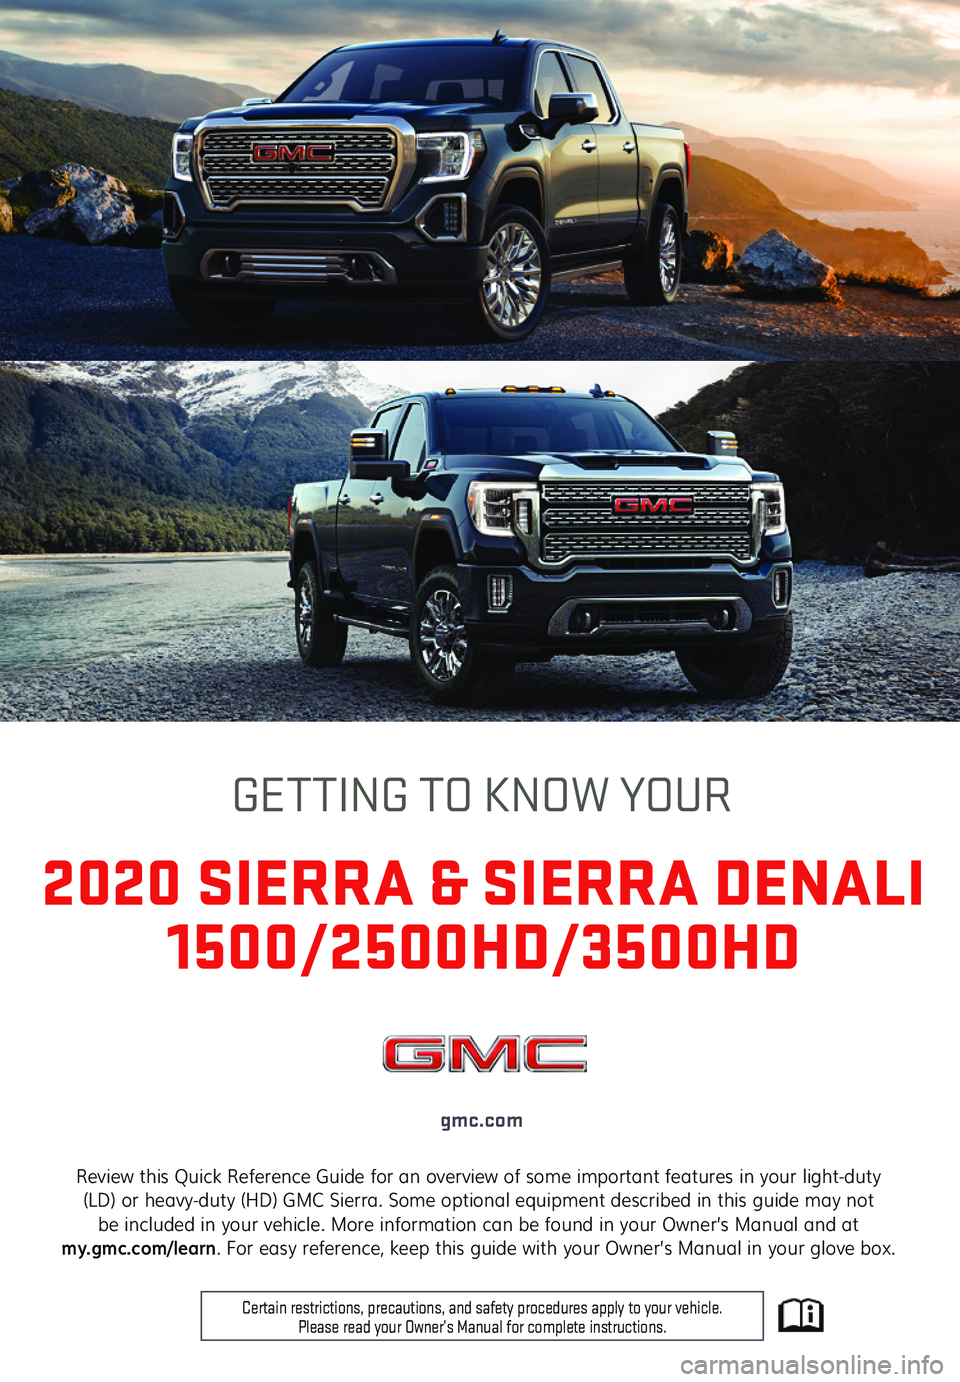 GMC SIERRA 2020  Get To Know Guide 1
Review this Quick Reference Guide for an overview of some important features in your light-duty (LD) or heavy-duty (HD) GMC Sierra. Some optional equipment described in this guide may not  be includ